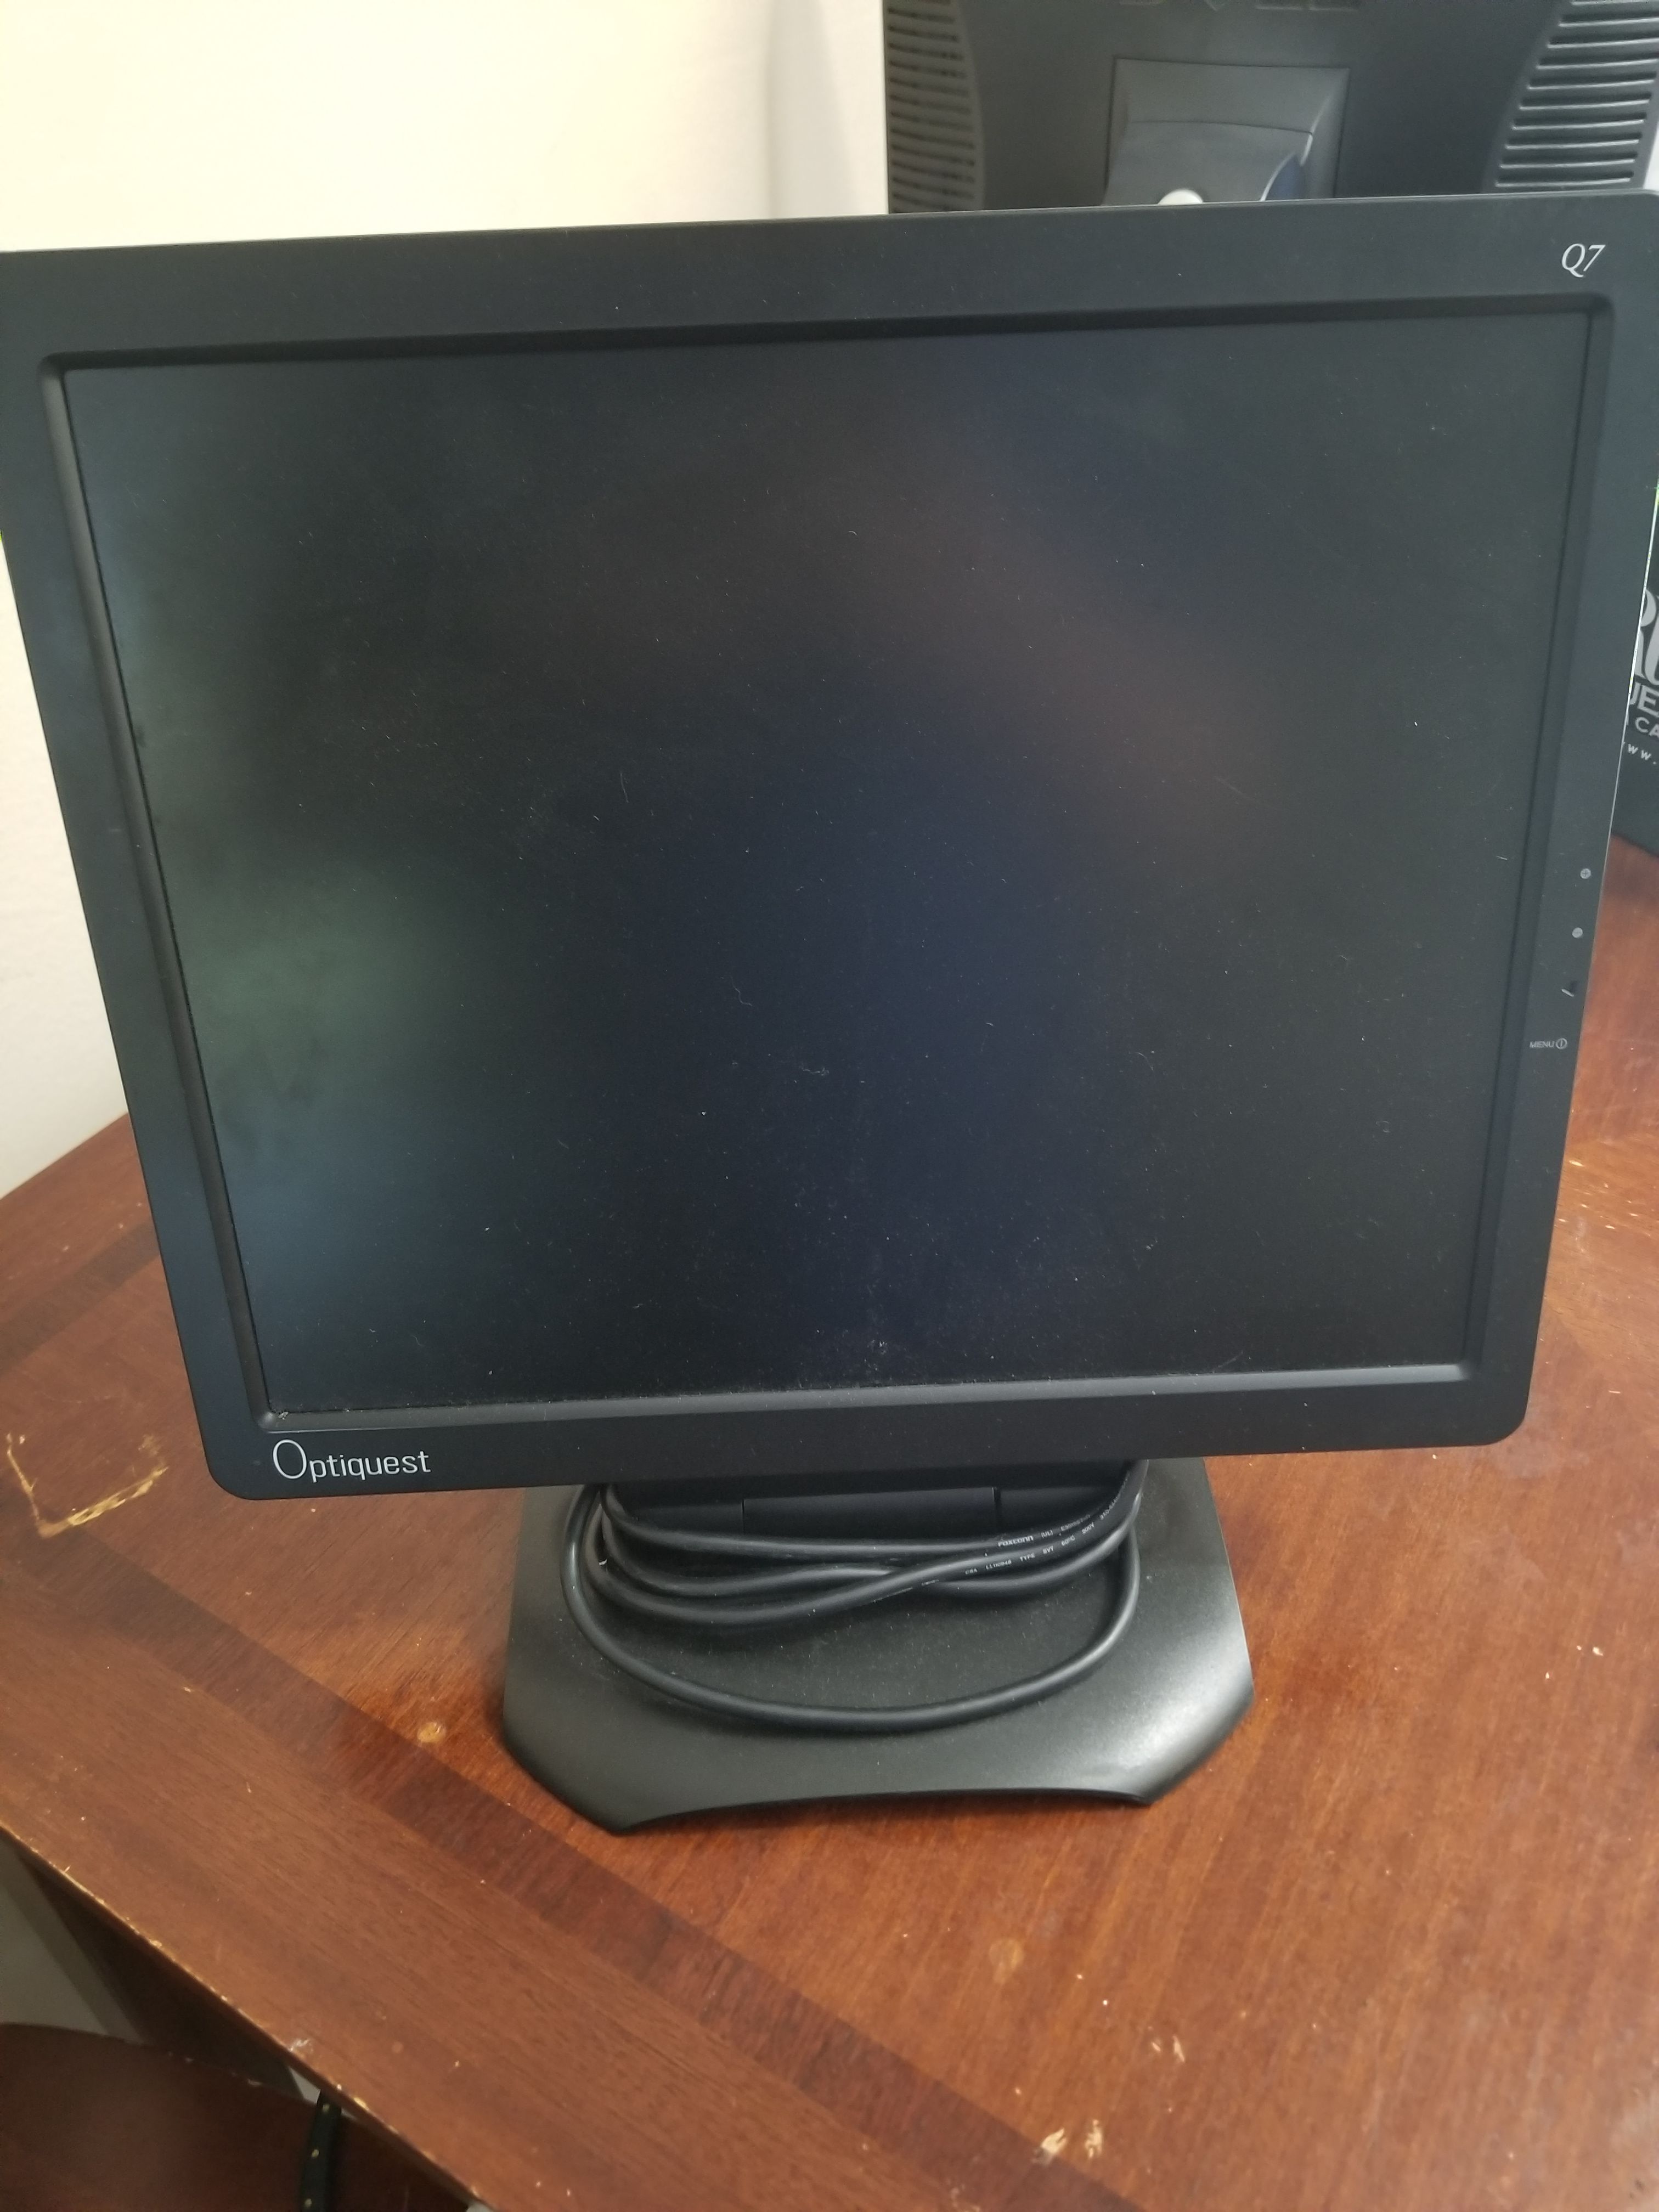 Viewsonic Optiquest Q7 17" Inch Computer Monitor ** STILL AVAILABLE **